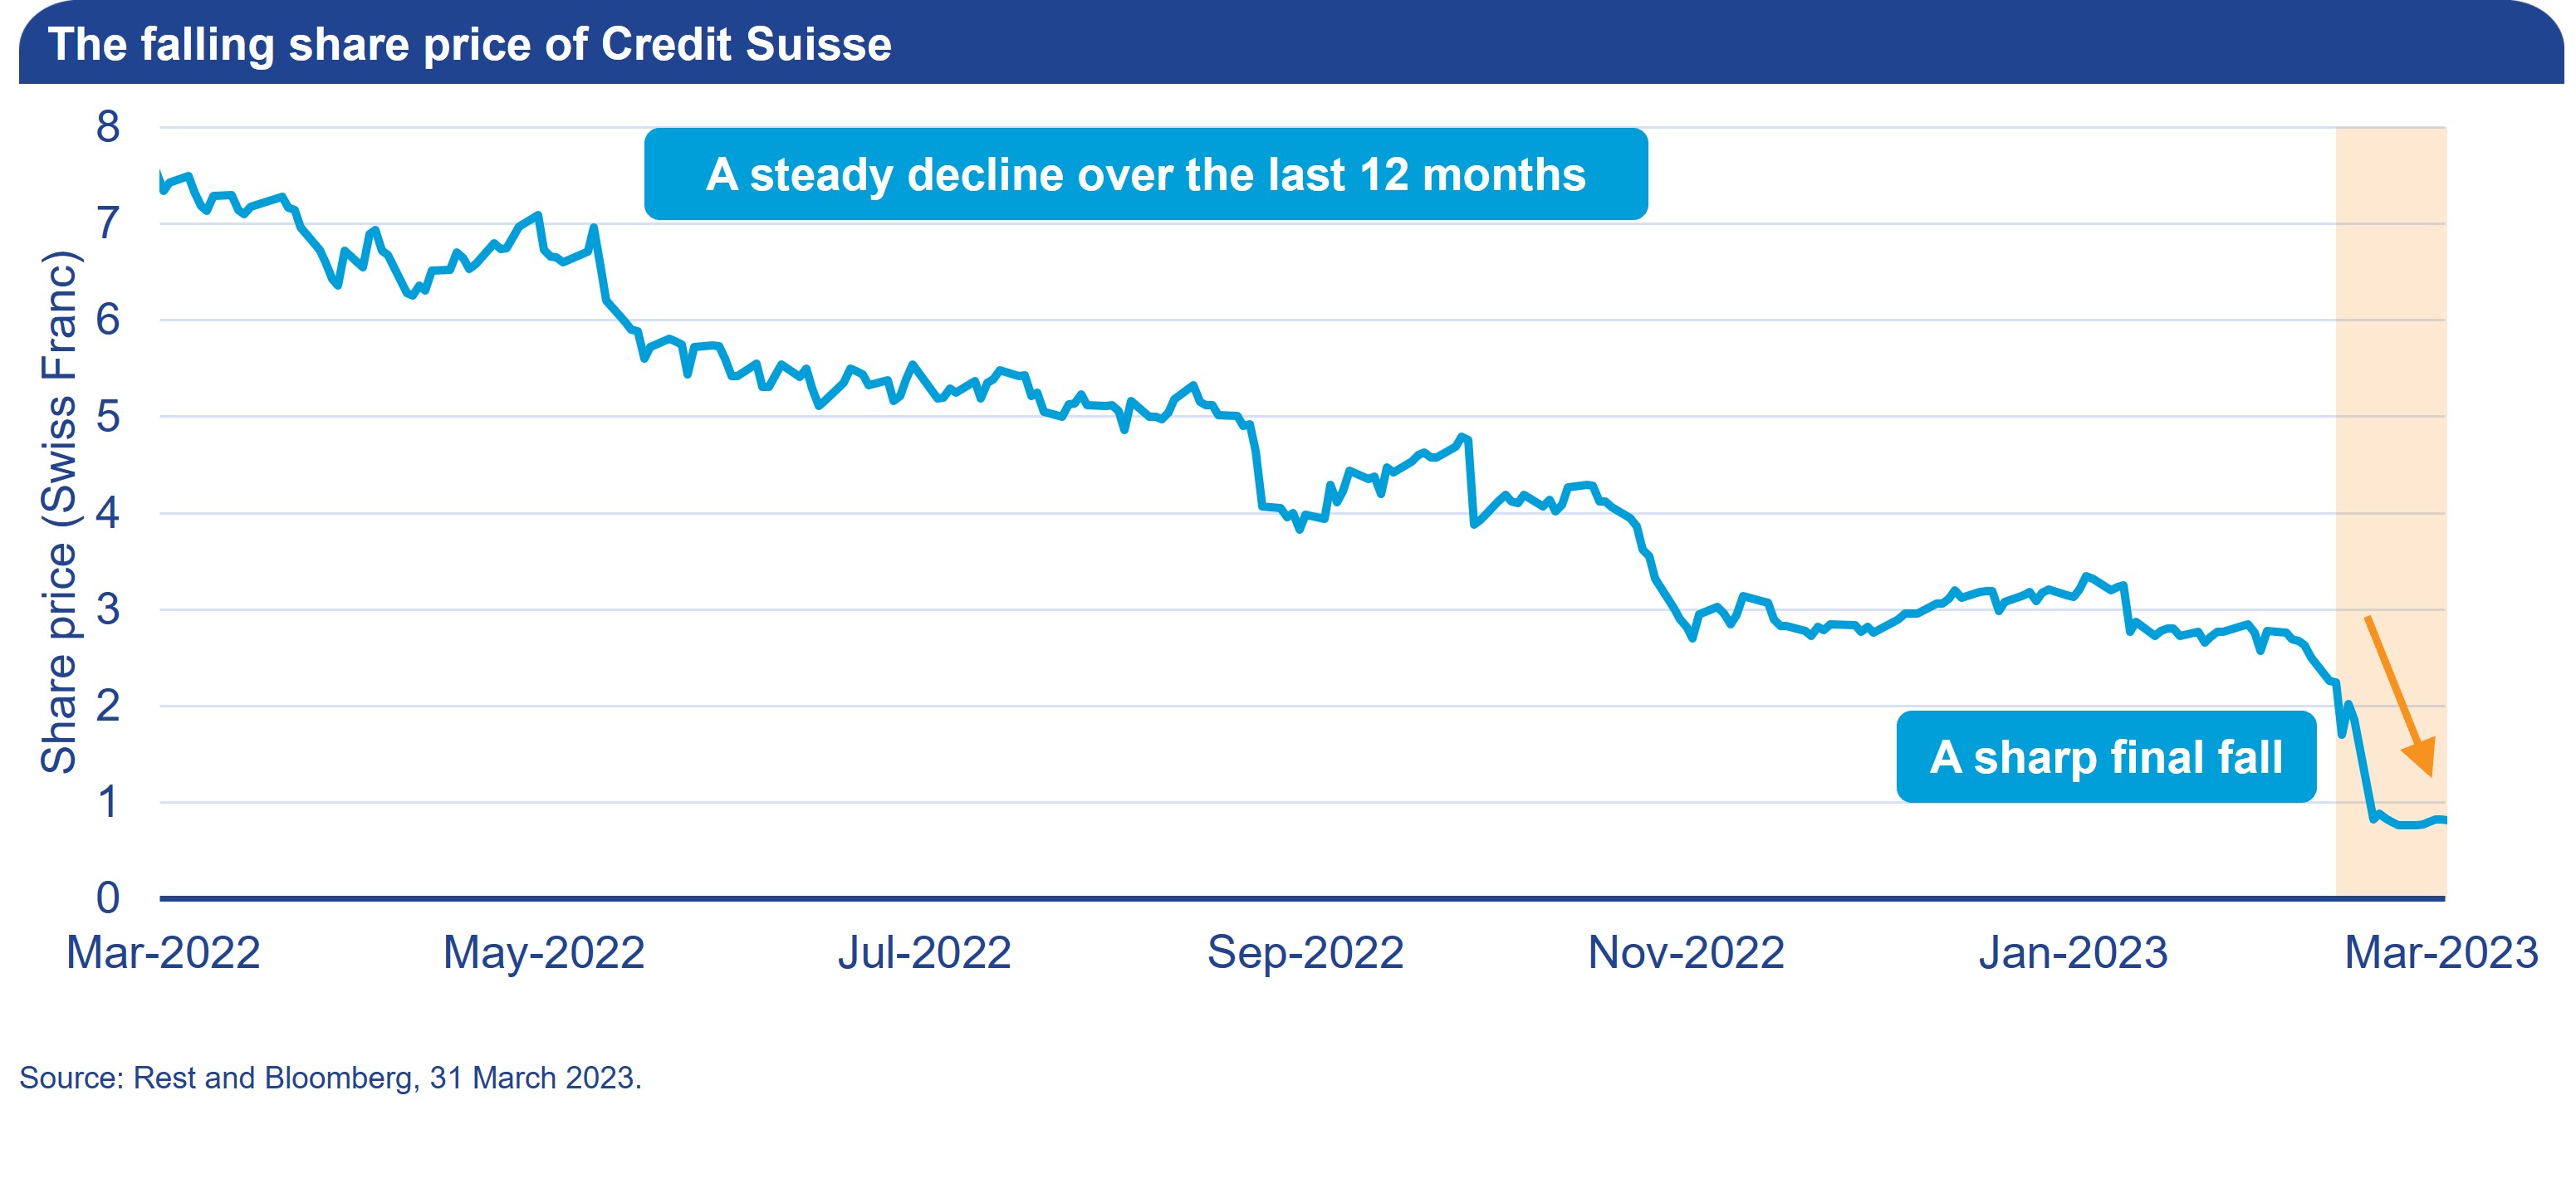 Credit Suisse share price